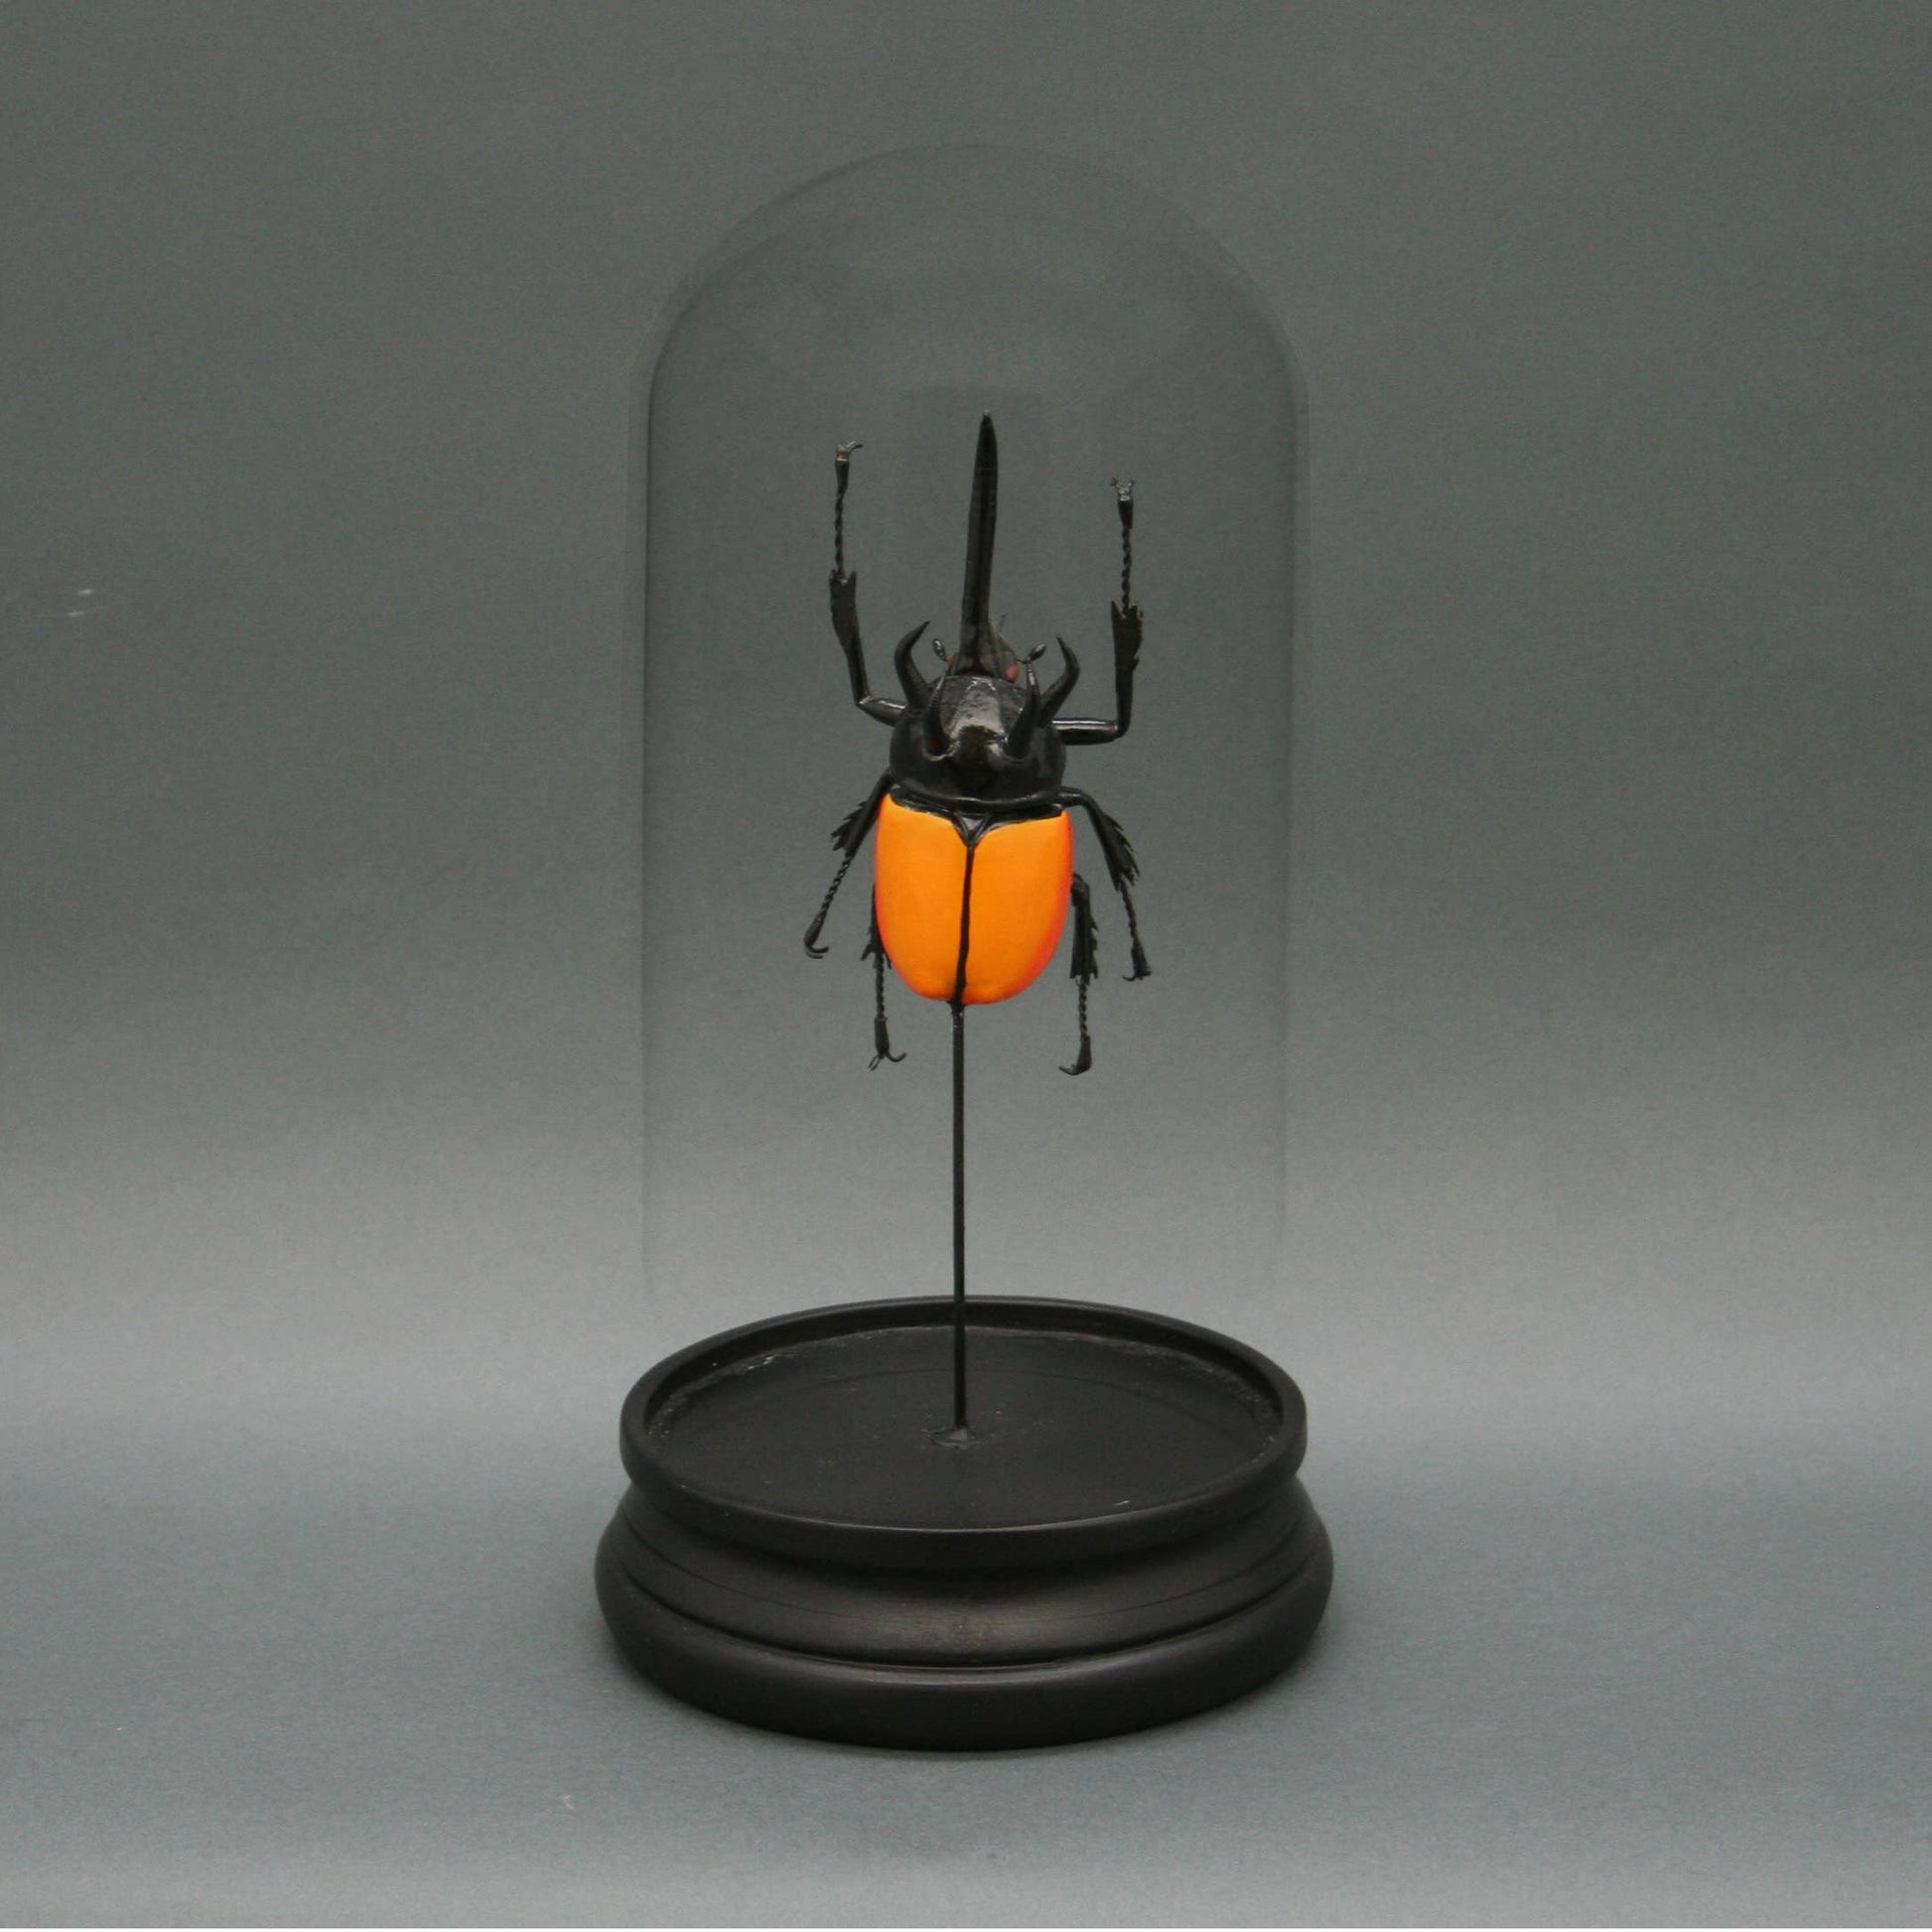 Five Horn Beetle in Glass Dome - Stemcell Science Shop